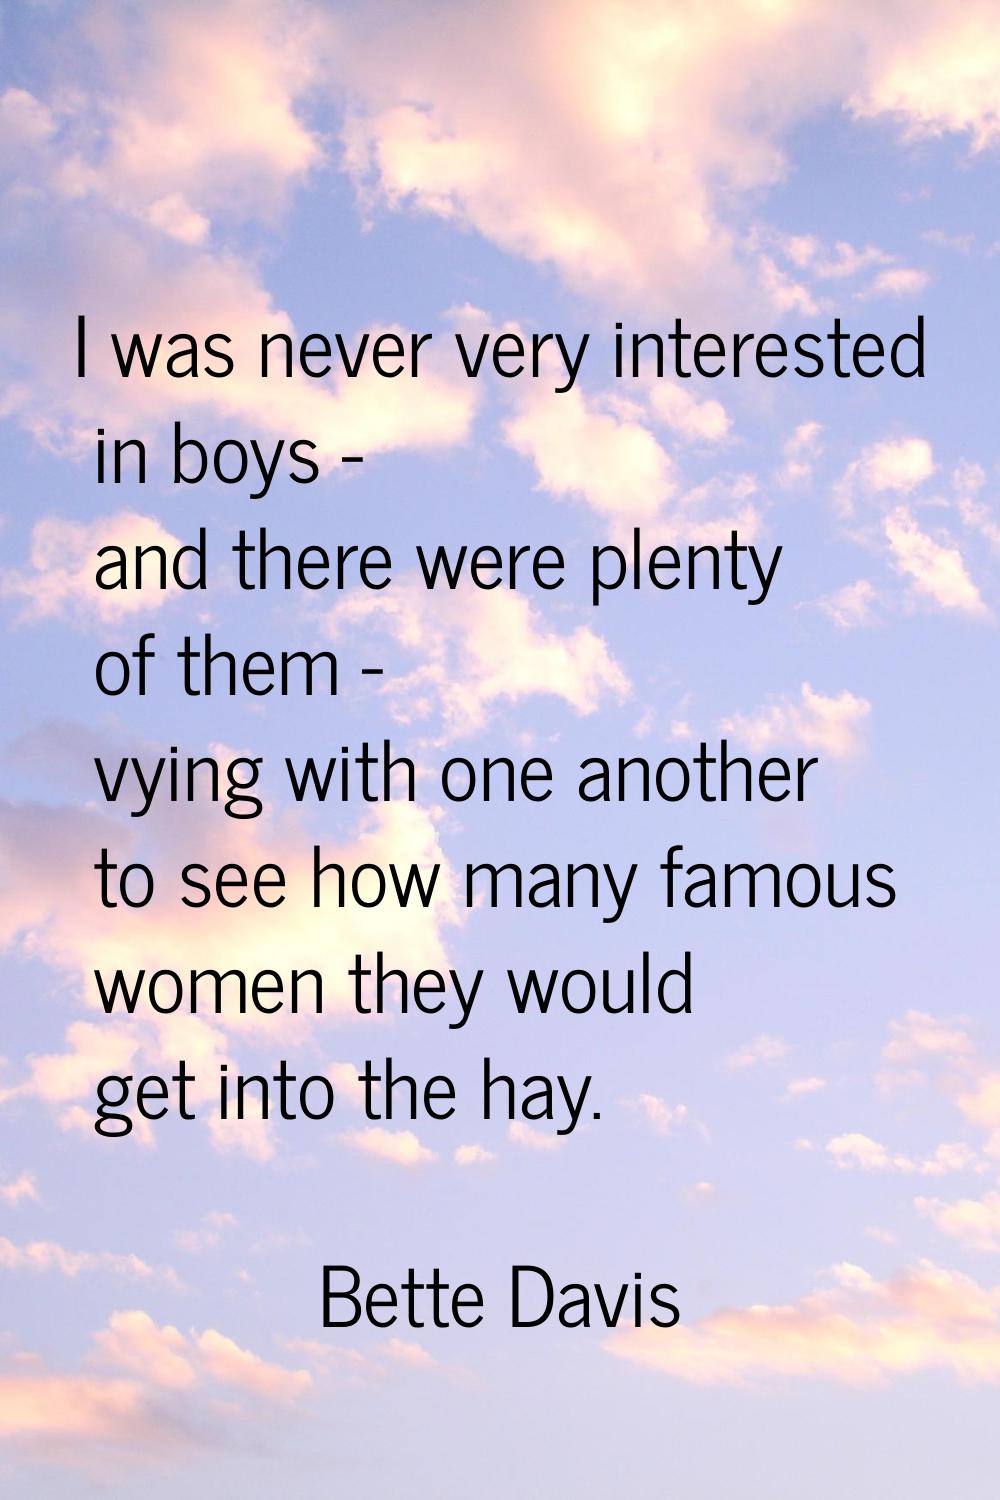 I was never very interested in boys - and there were plenty of them - vying with one another to see